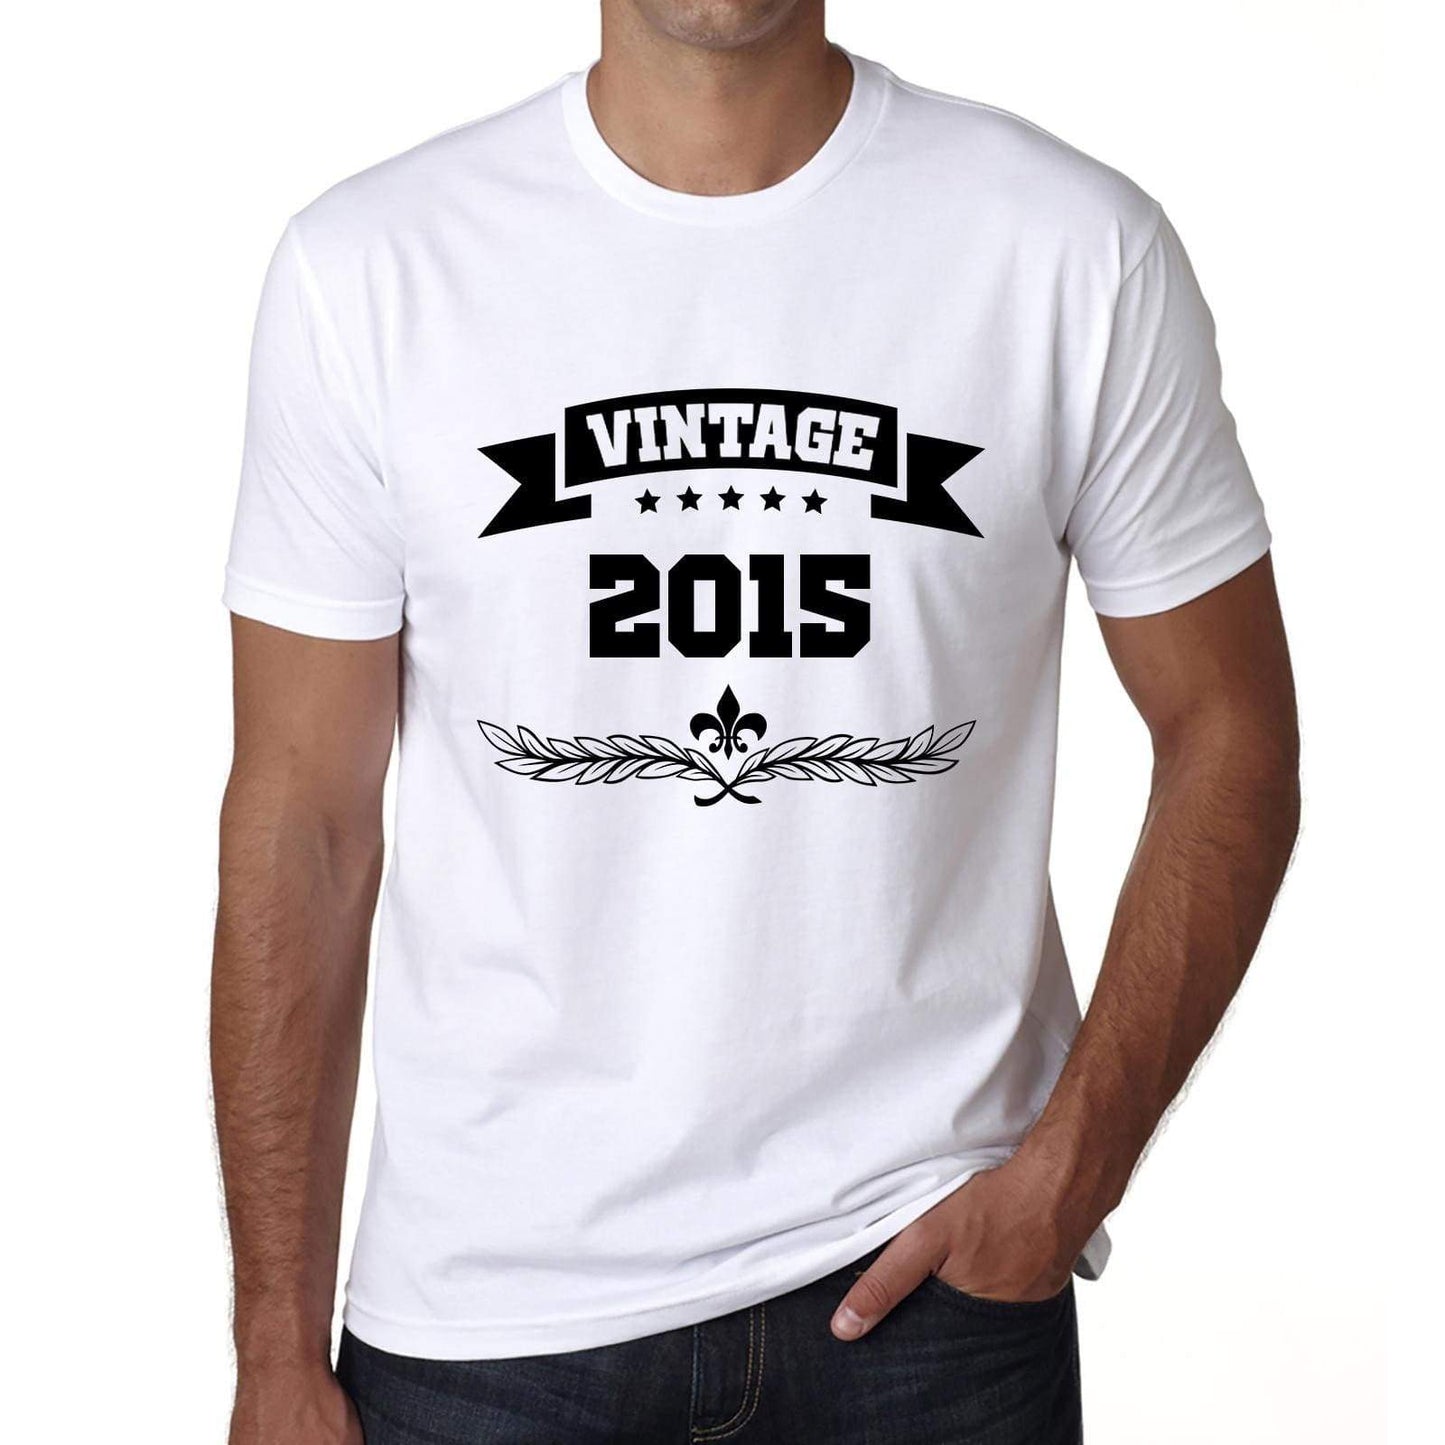 2015 Vintage Year White Mens Short Sleeve Round Neck T-Shirt 00096 - White / S - Casual